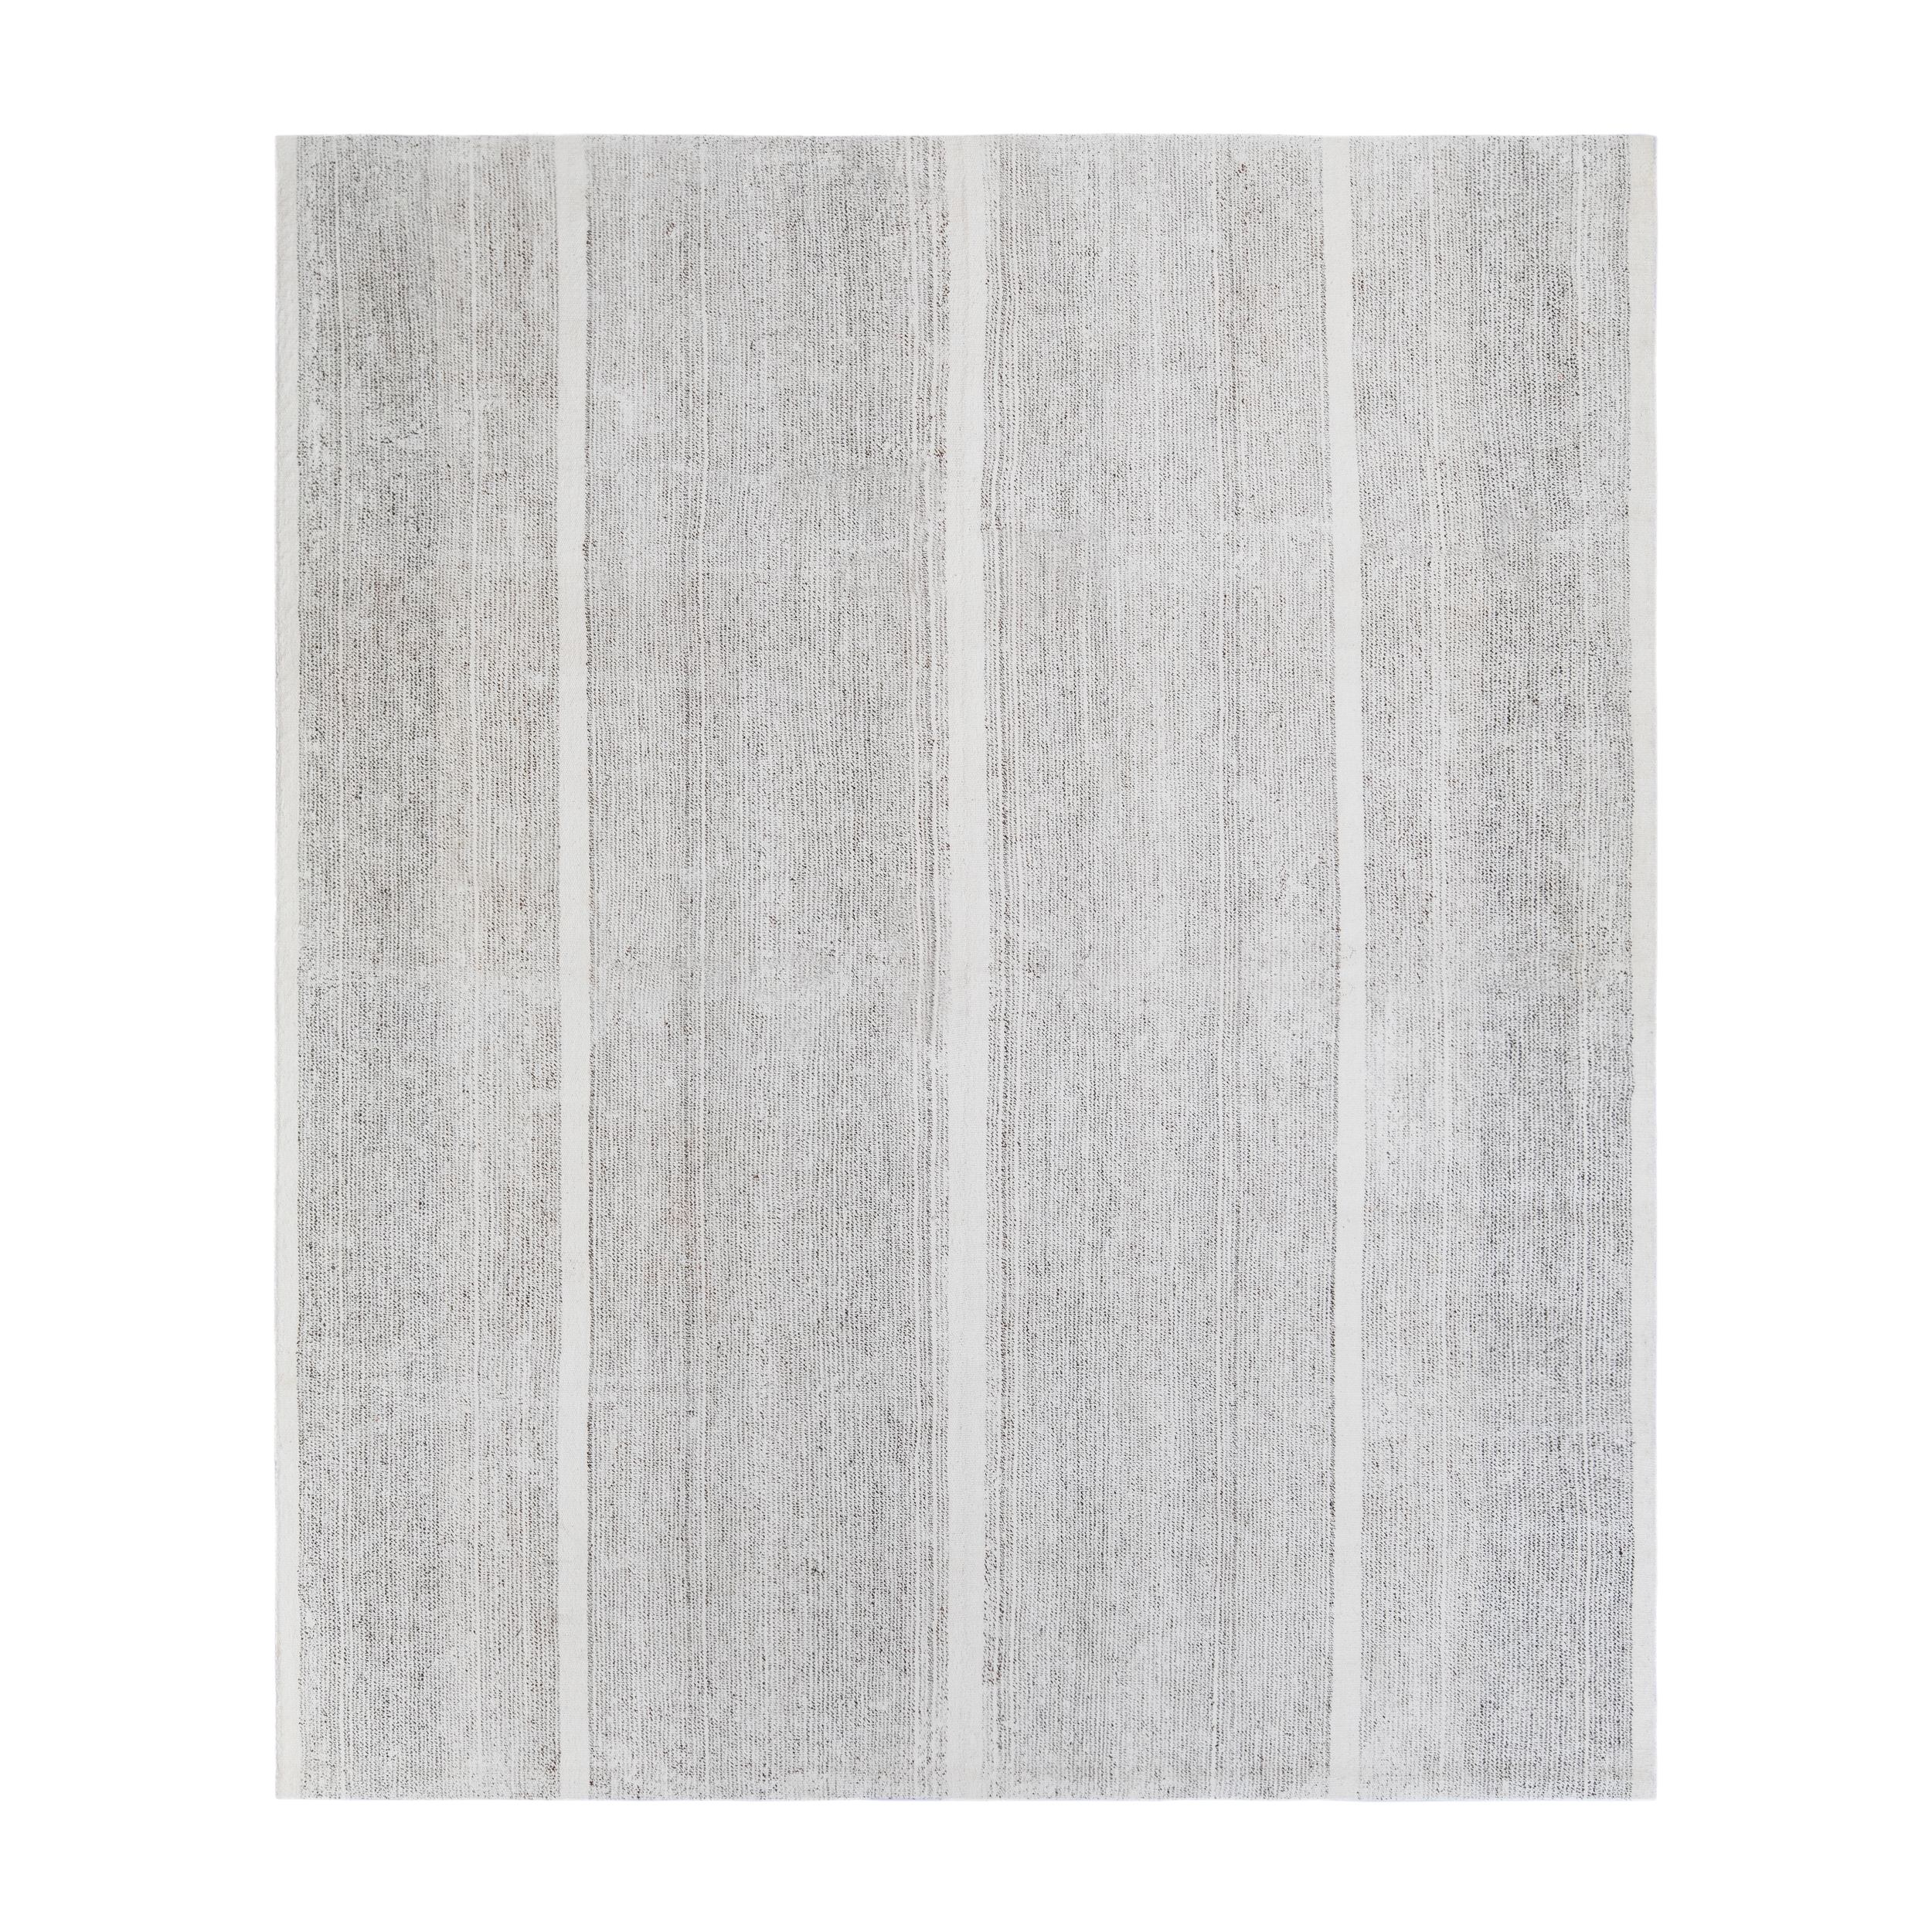 Vintage Pelas flatweave rug is a modern take on the Pelas rug portraying unmatched craftsmanship and a minimalist approach. 